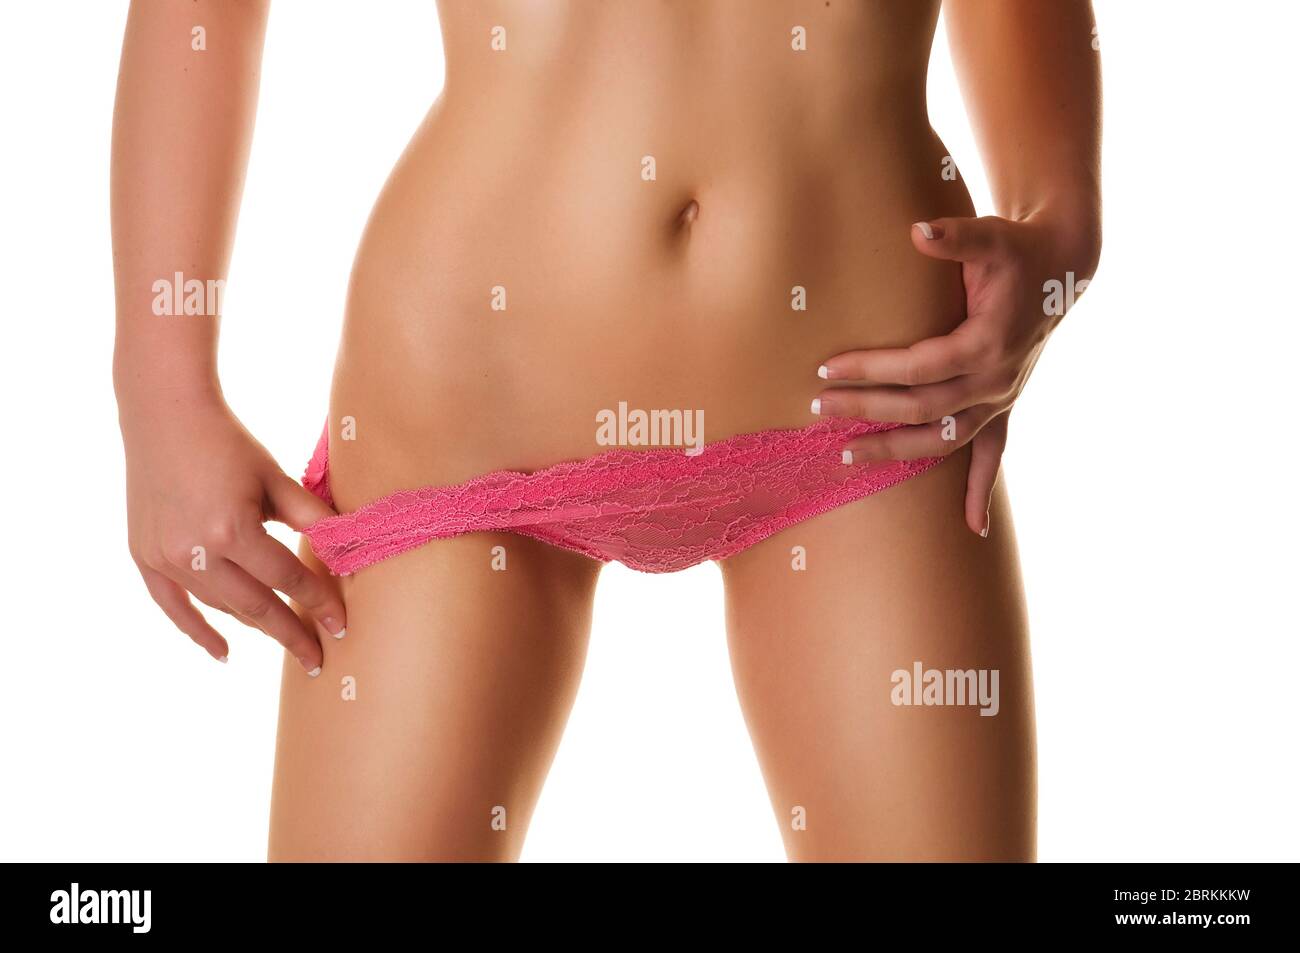 https://c8.alamy.com/comp/2BRKKKW/beautiful-slim-female-body-close-up-photo-of-ideal-elastic-flawless-womans-belly-wearing-pink-lace-panties-taut-elastic-legs-firm-sexy-abdomen-is-2BRKKKW.jpg